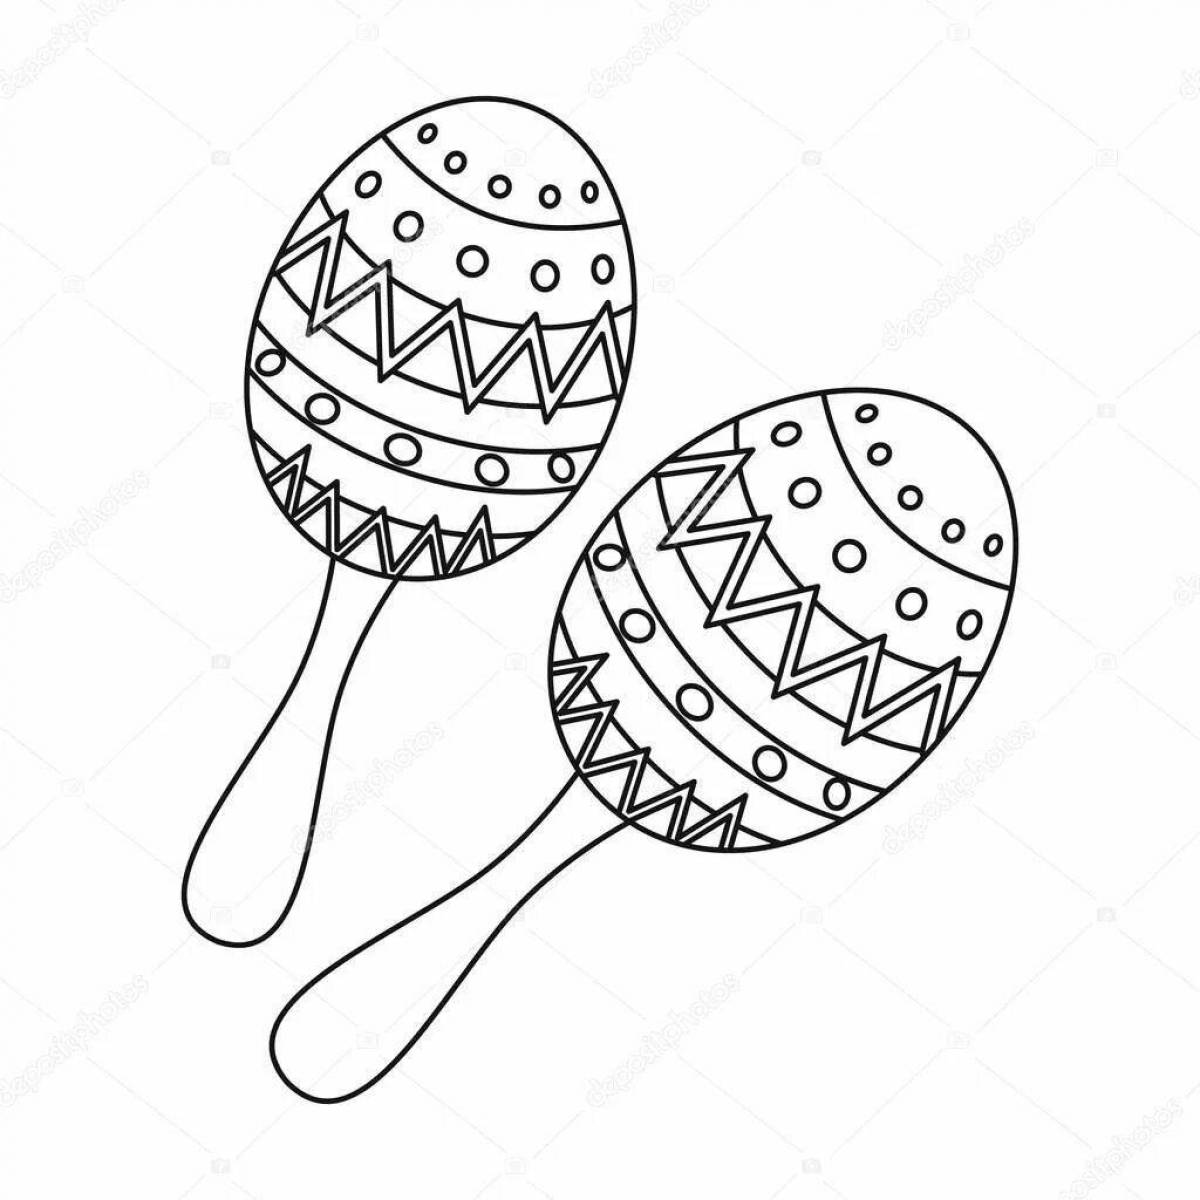 Complex spoons for Russian folk instruments